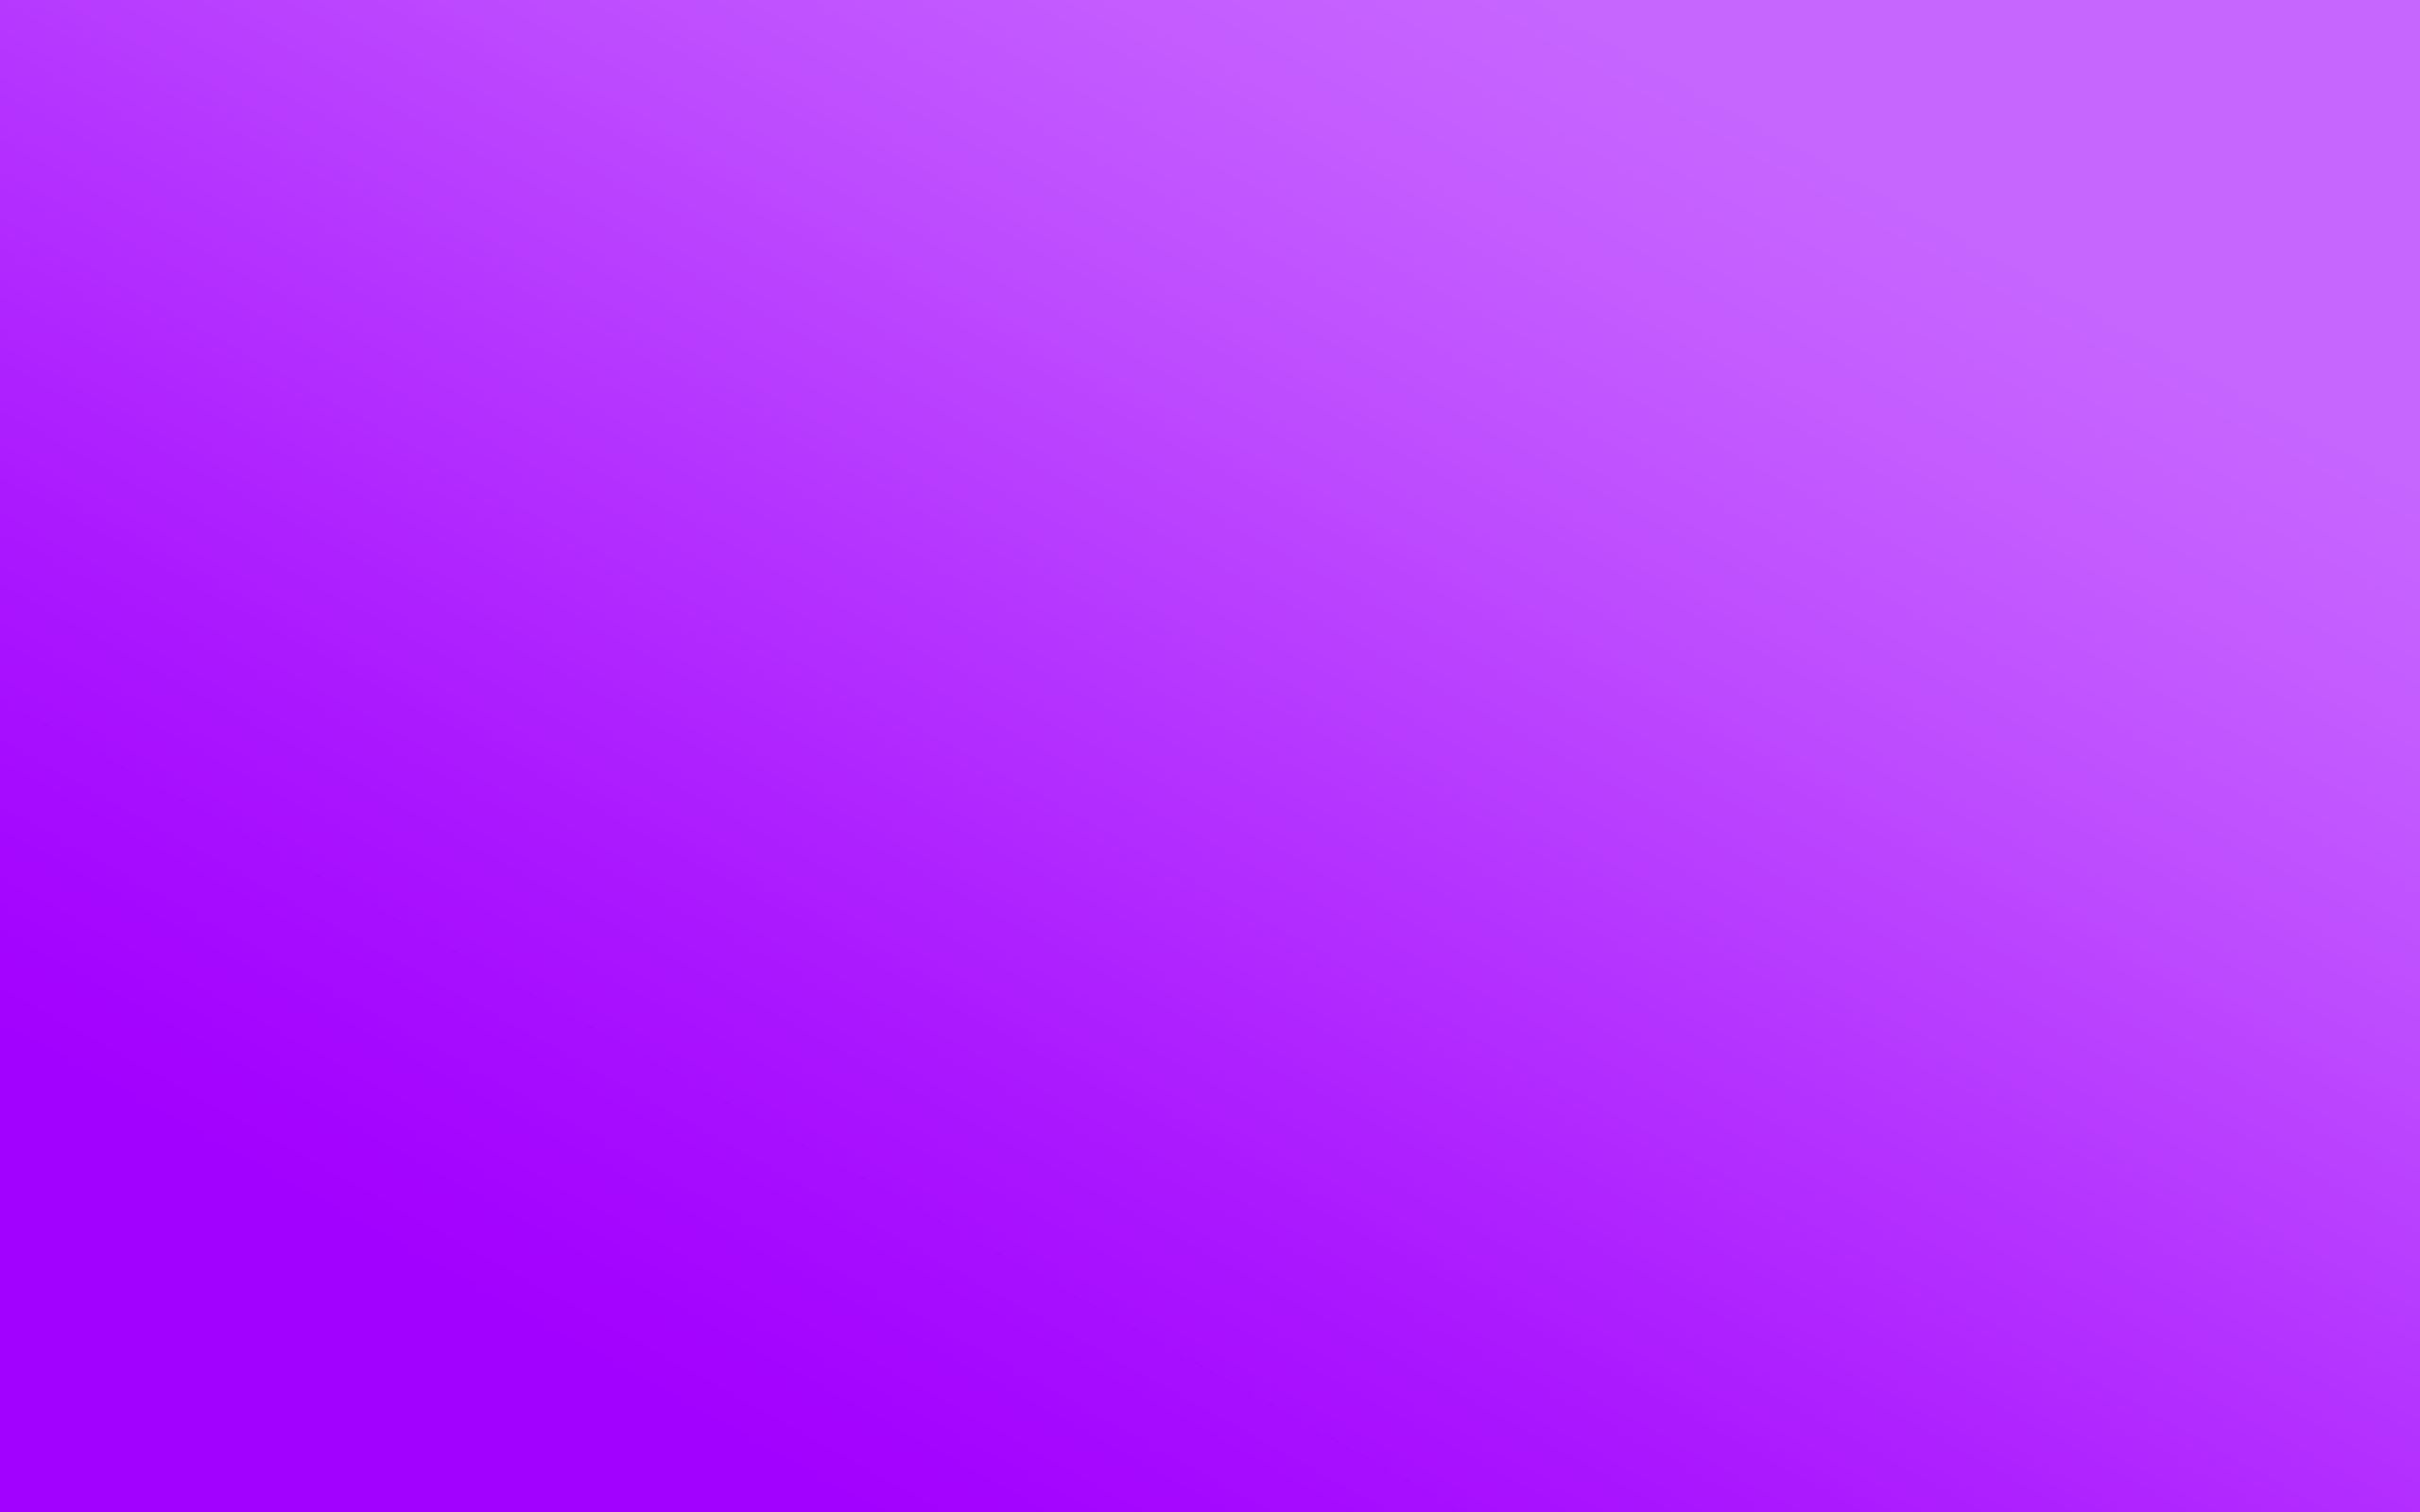 bright, light coloured, abstract, background, lilac, light, solid Phone Background